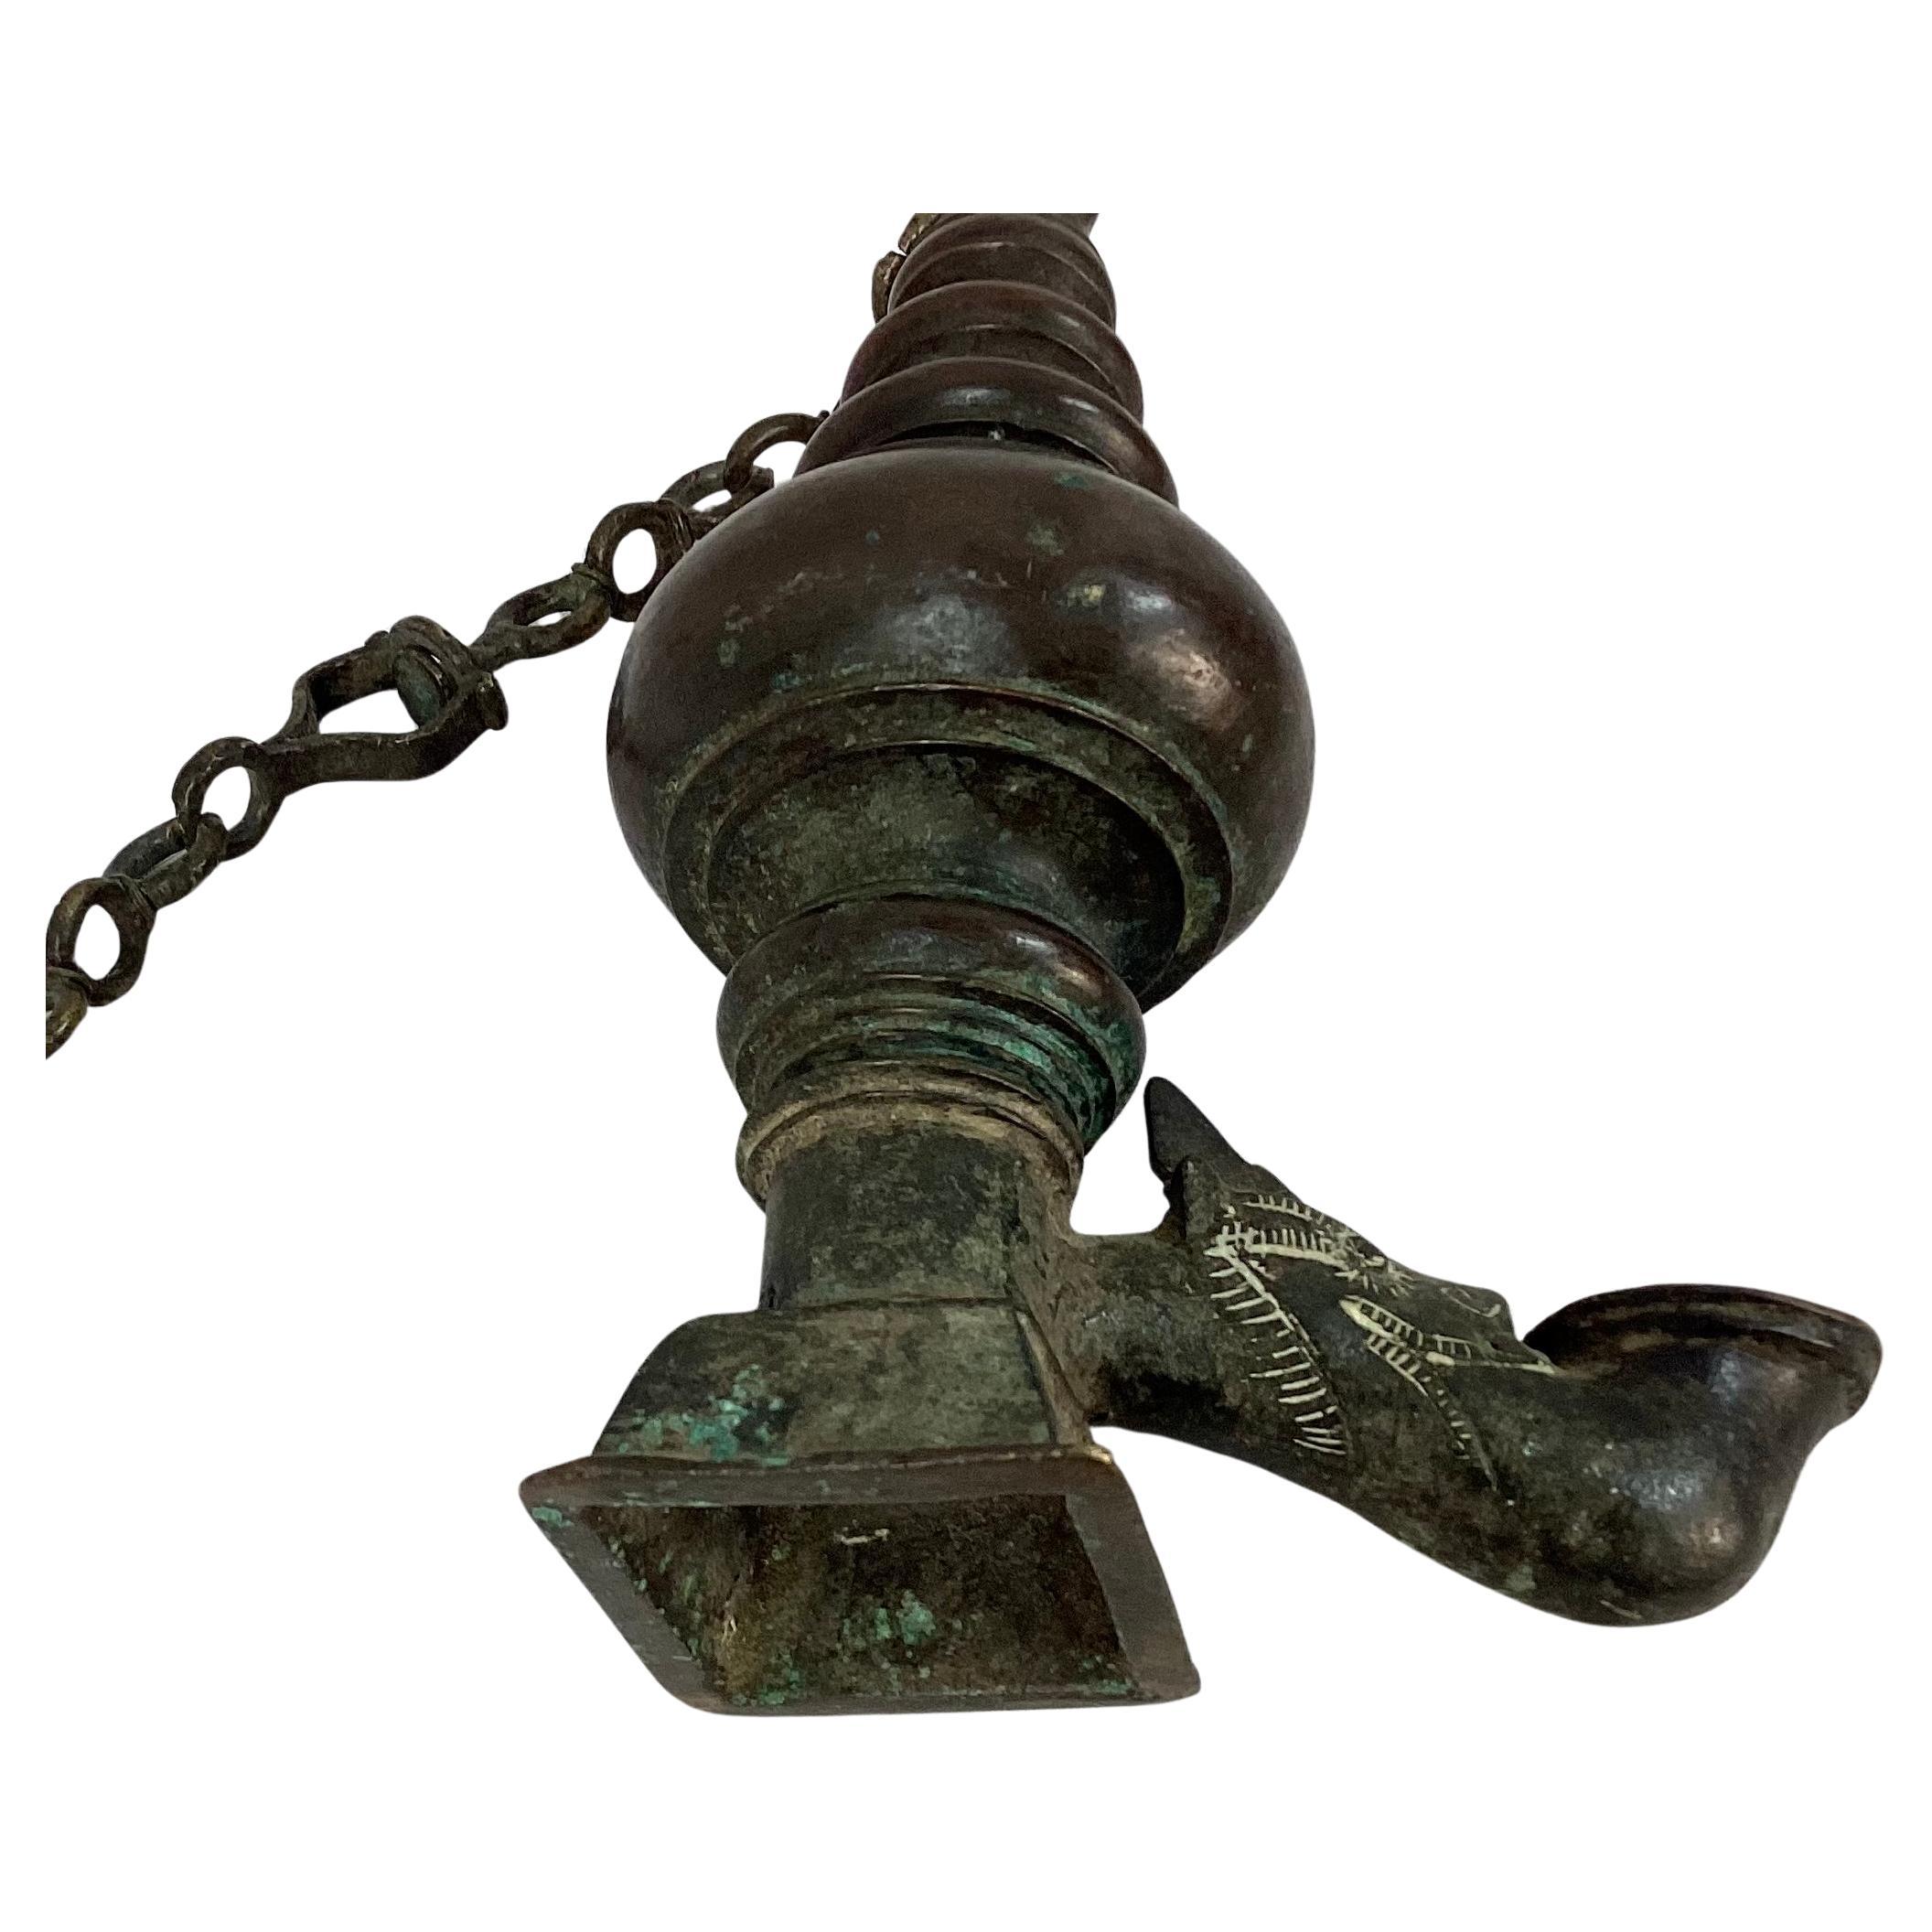 18th Century Sri Lankan hanging bronze oil lamp with Makara head spout. Solid bronze. Can be hung or used as a stand-alone decorating piece. Great piece to use with any decor.  Dimensions listed are including hanging bar. Oil lamp by itself is is